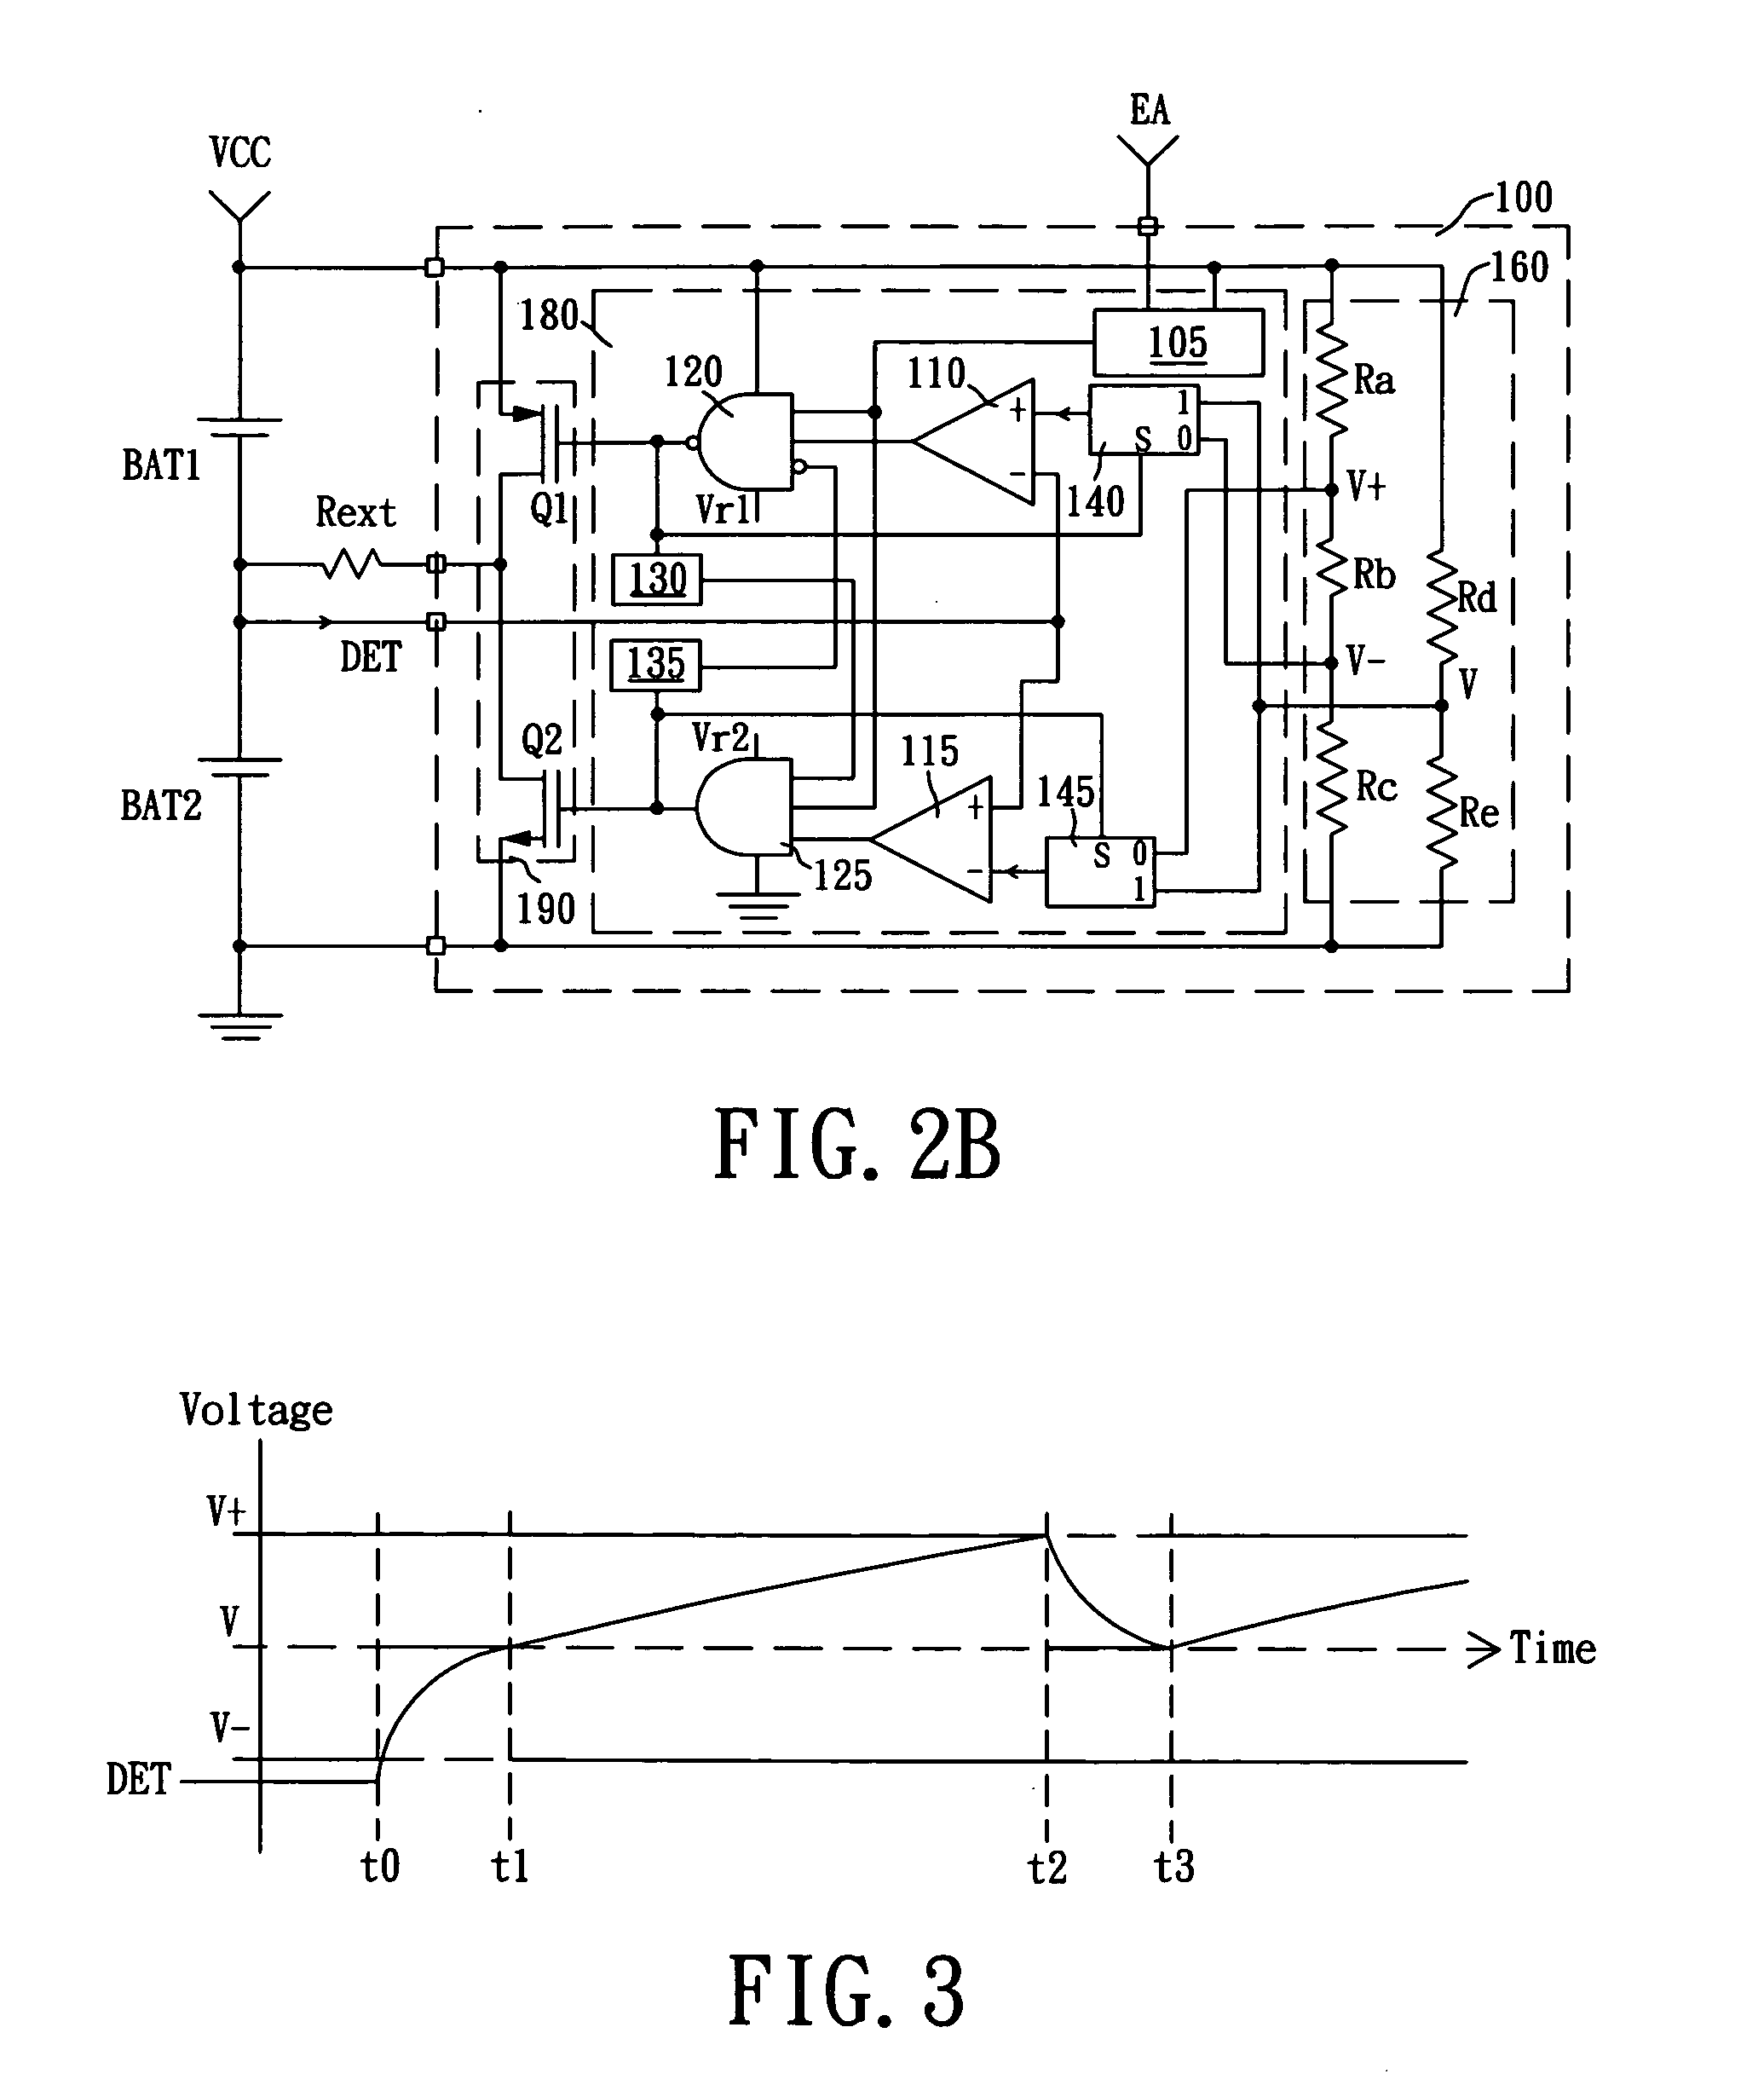 Battery charging controller and battery balance charging controller